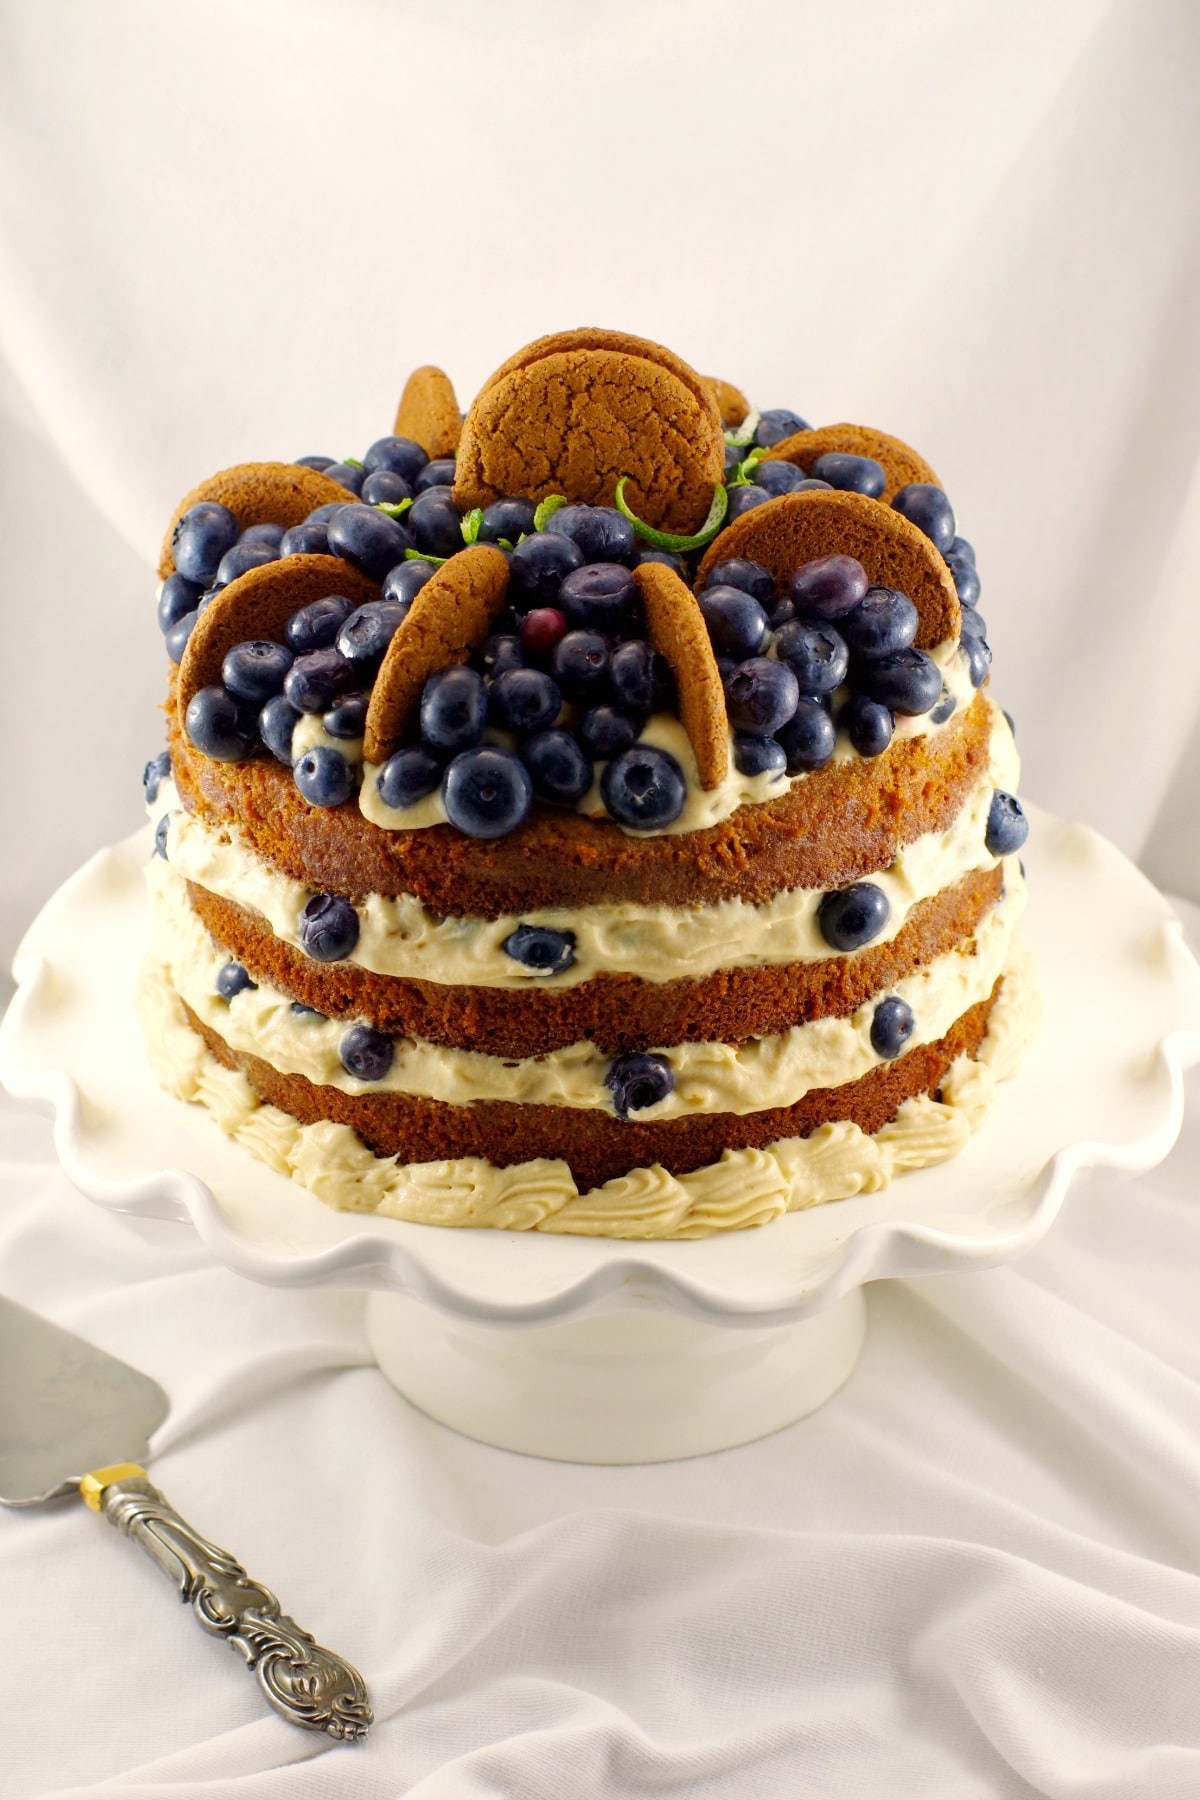 Old-fashioned Gingerbread Cake with cookie Butter filling - foodmeanderings.com